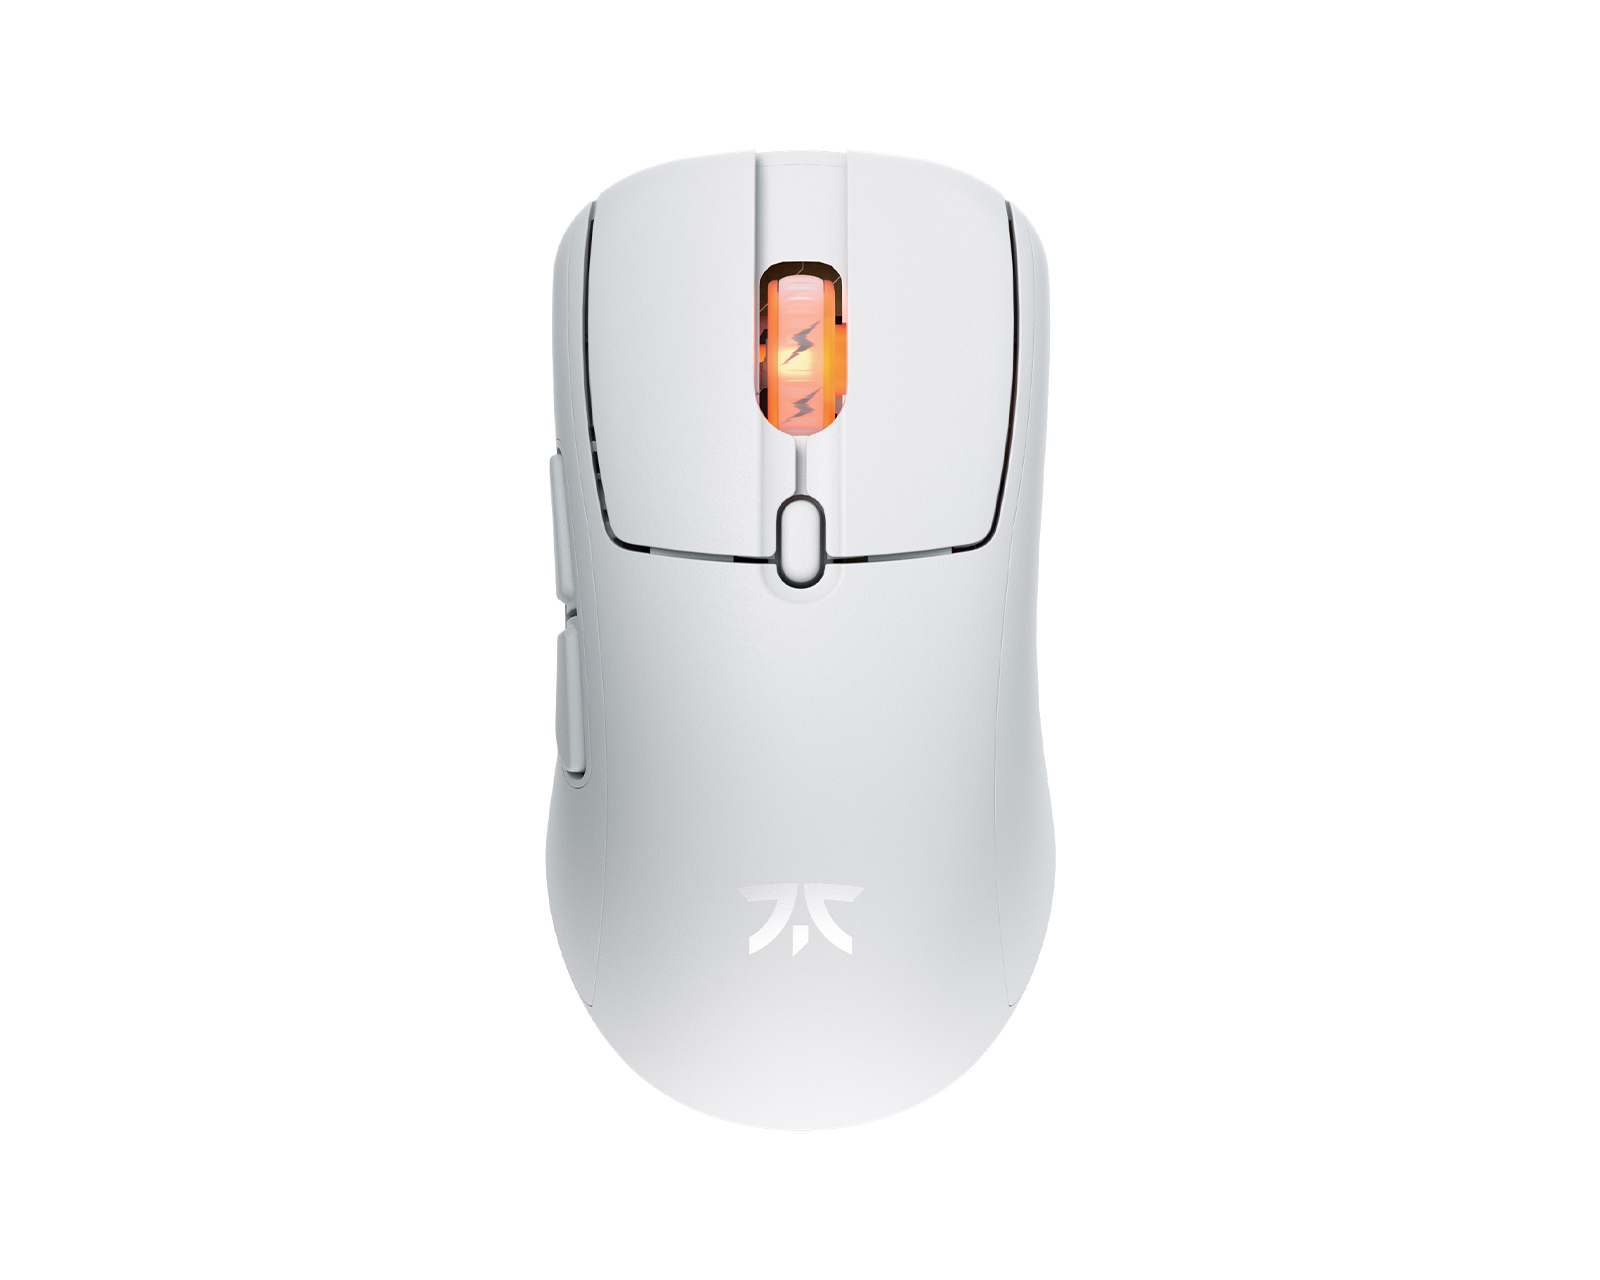 Fnatic Gear Bolt Wireless Gaming Mouse - White - us.MaxGaming.com